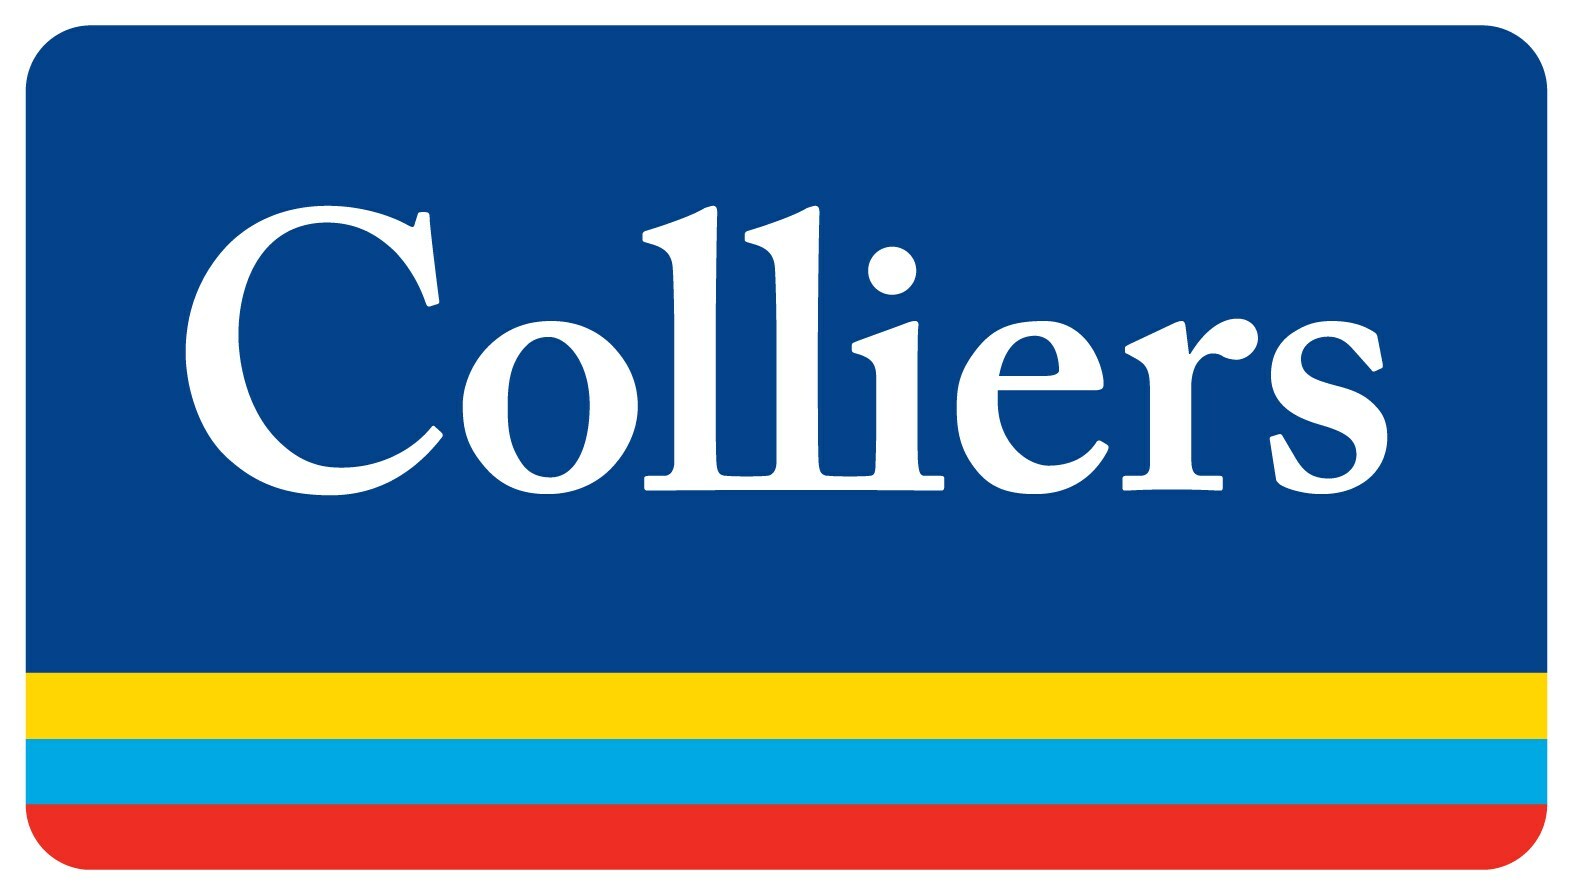 Indian manufacturing market has the potential to reach US$ 1 trillion by 2025-26, Gujarat is poised to become India's foremost manufacturing powerhouse: Colliers